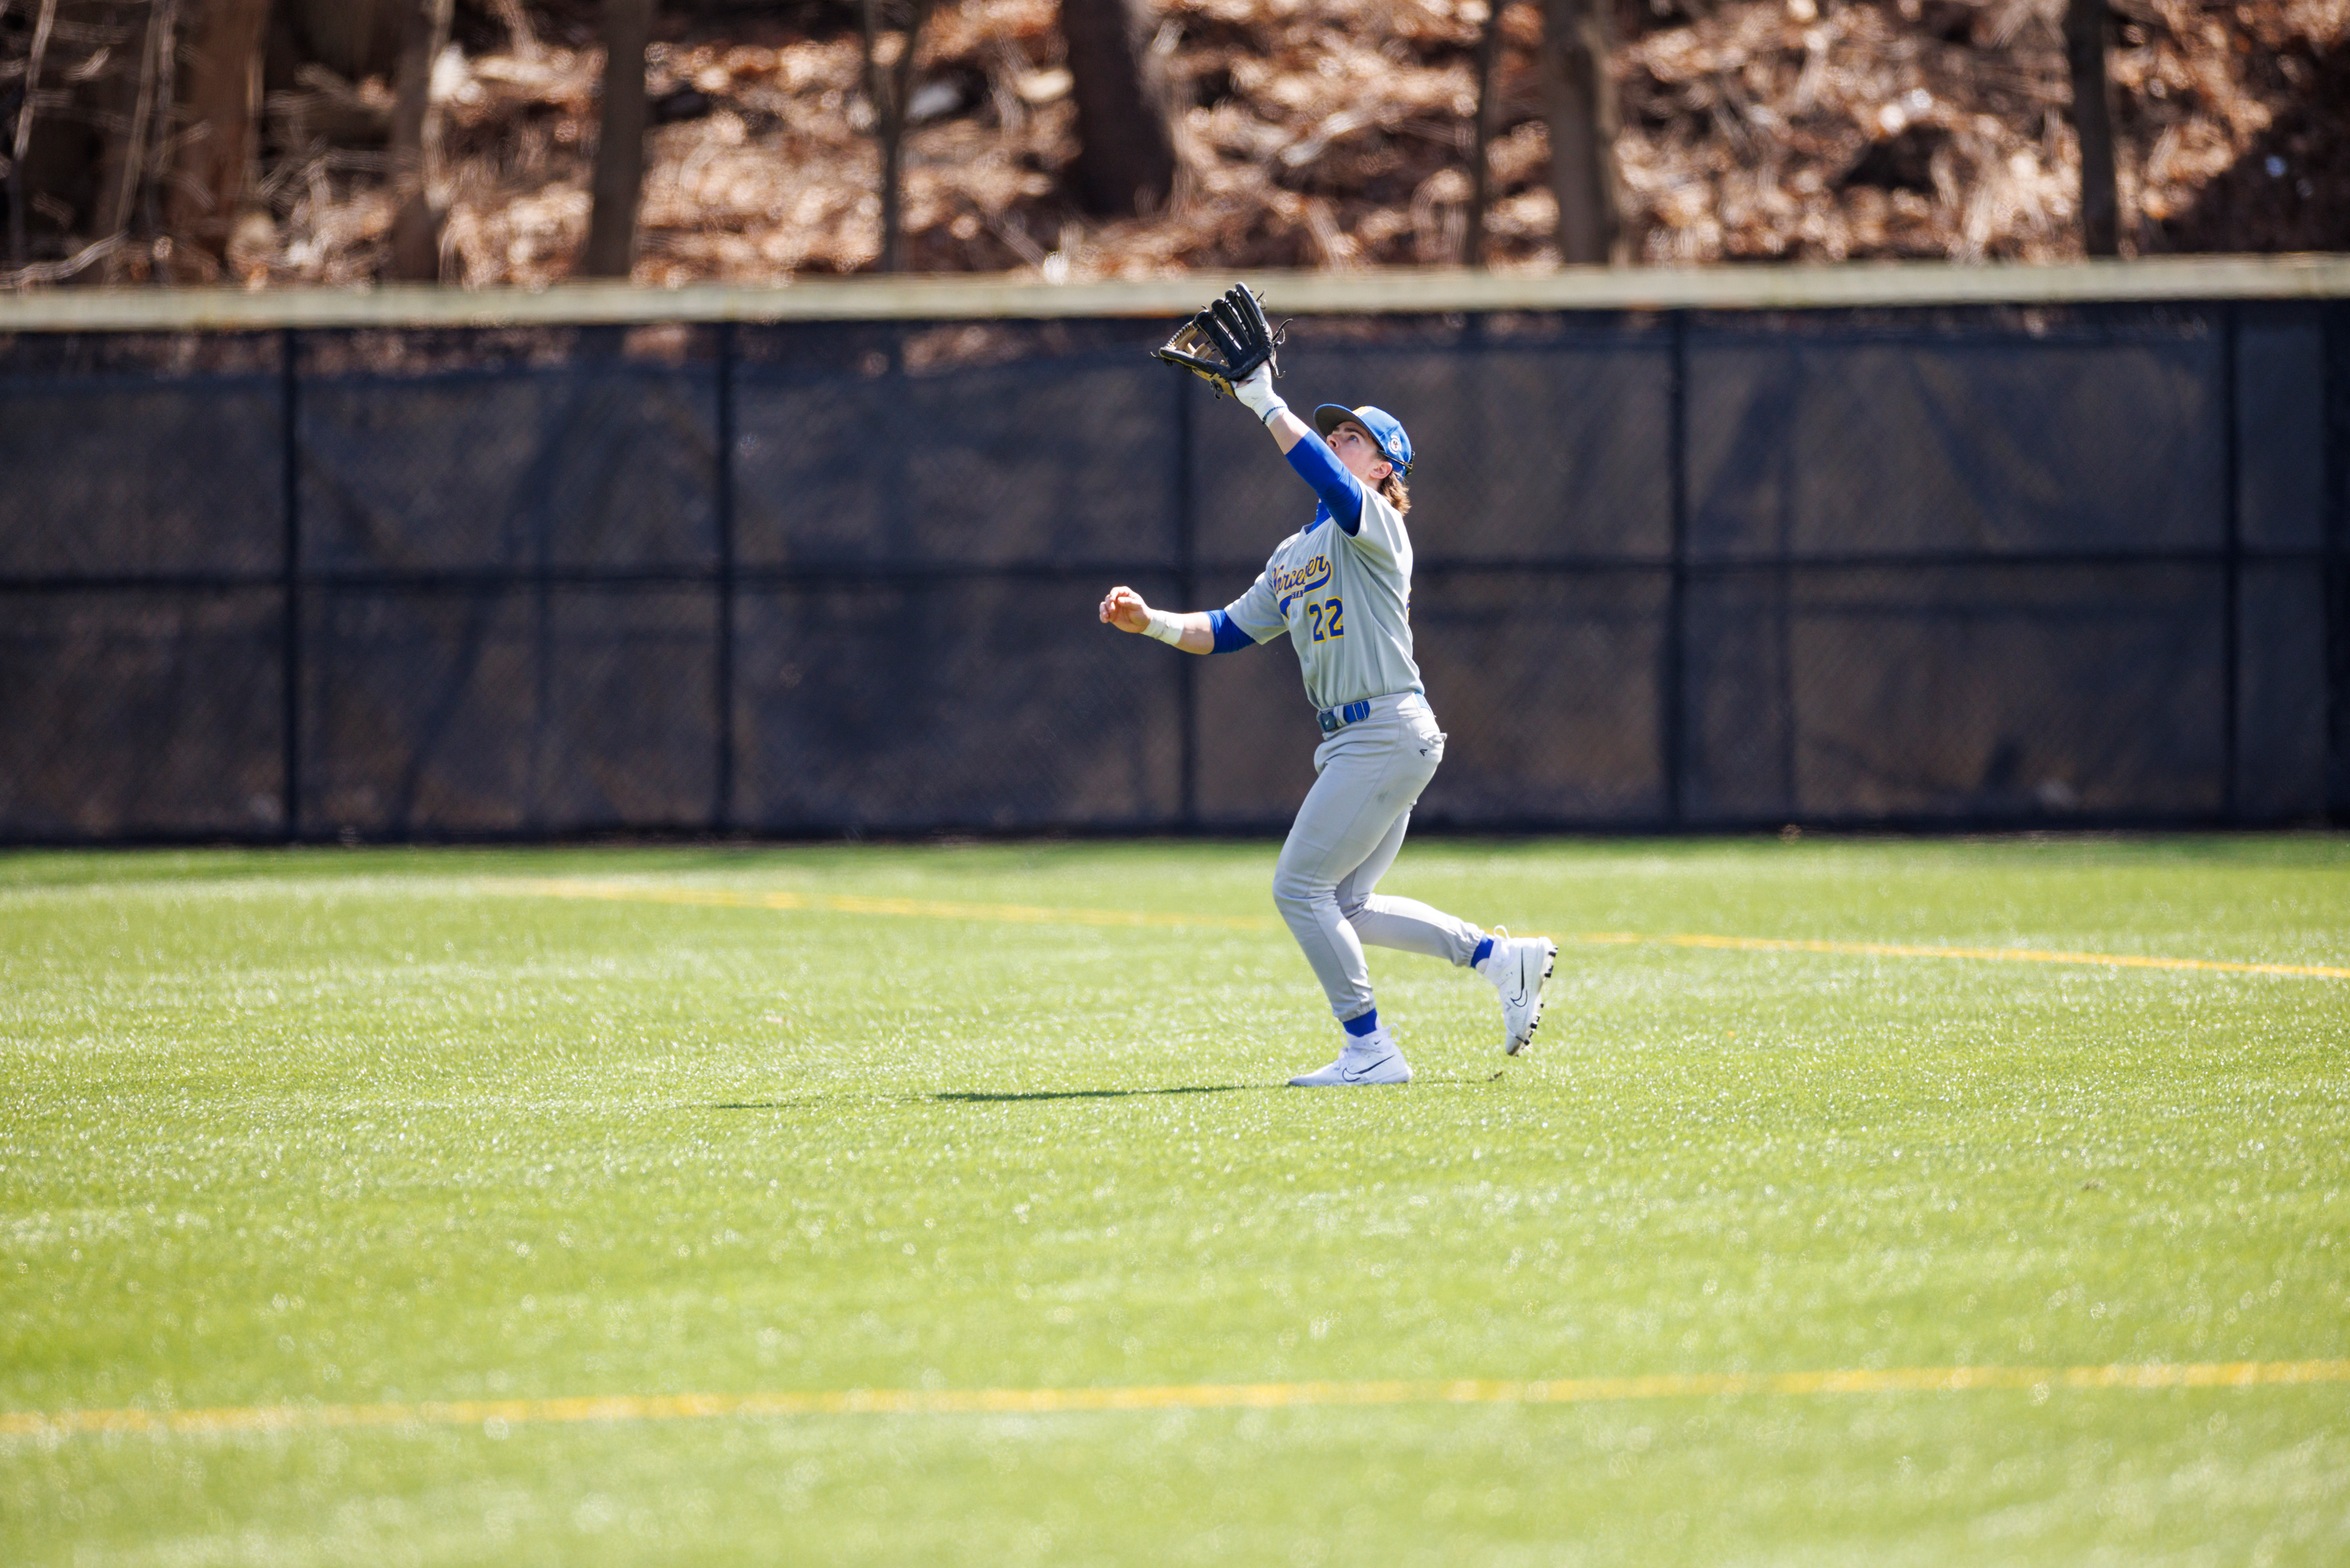 Lancers Claim Series with MCLA in Ninth Inning Comeback